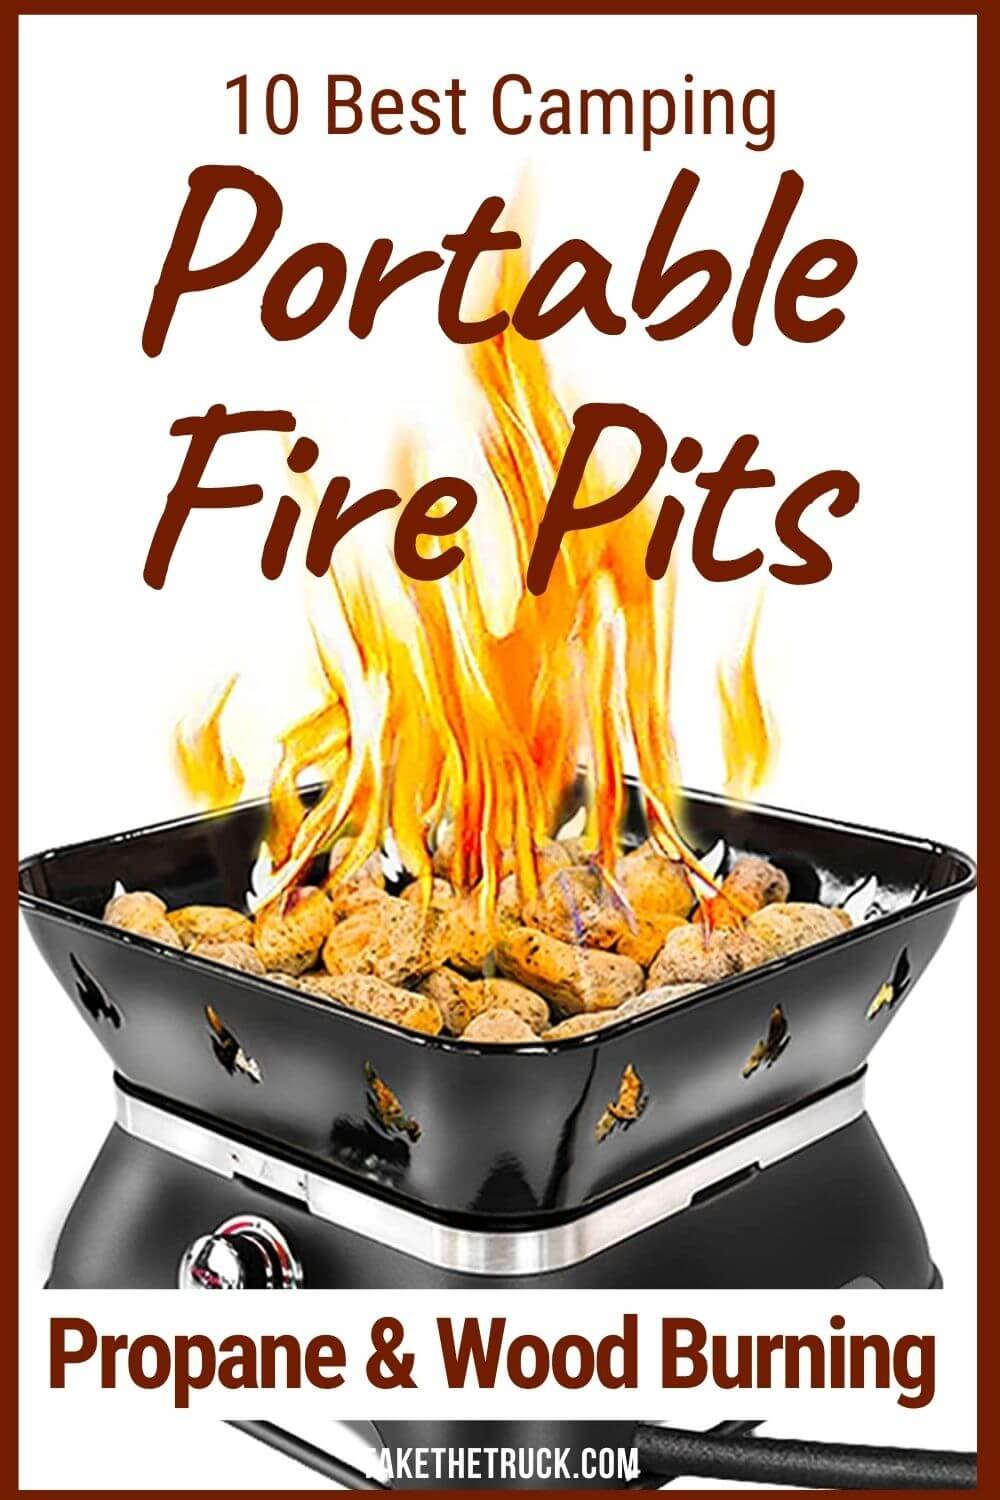 Best portable fire pit for camping - portable camping fire pit - portable fireplace for camping - portable propane fire pit for camping - wood burning camping fire pit